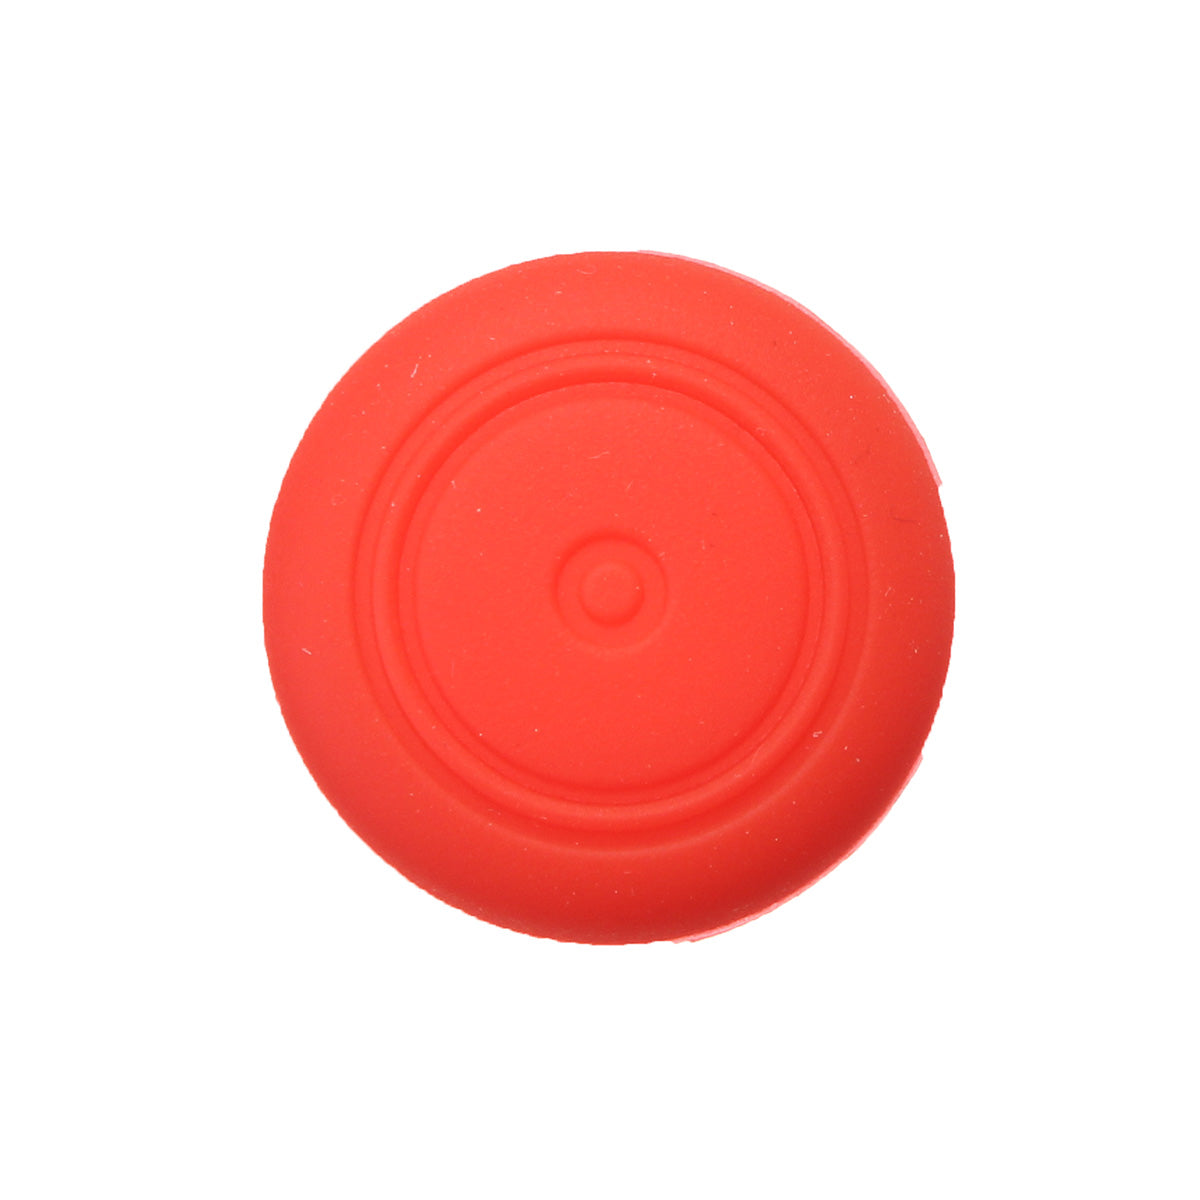 Silicone Replacement Thumb Grip Stick Cap Cover Skin For Nintendo Switch Joy-Con